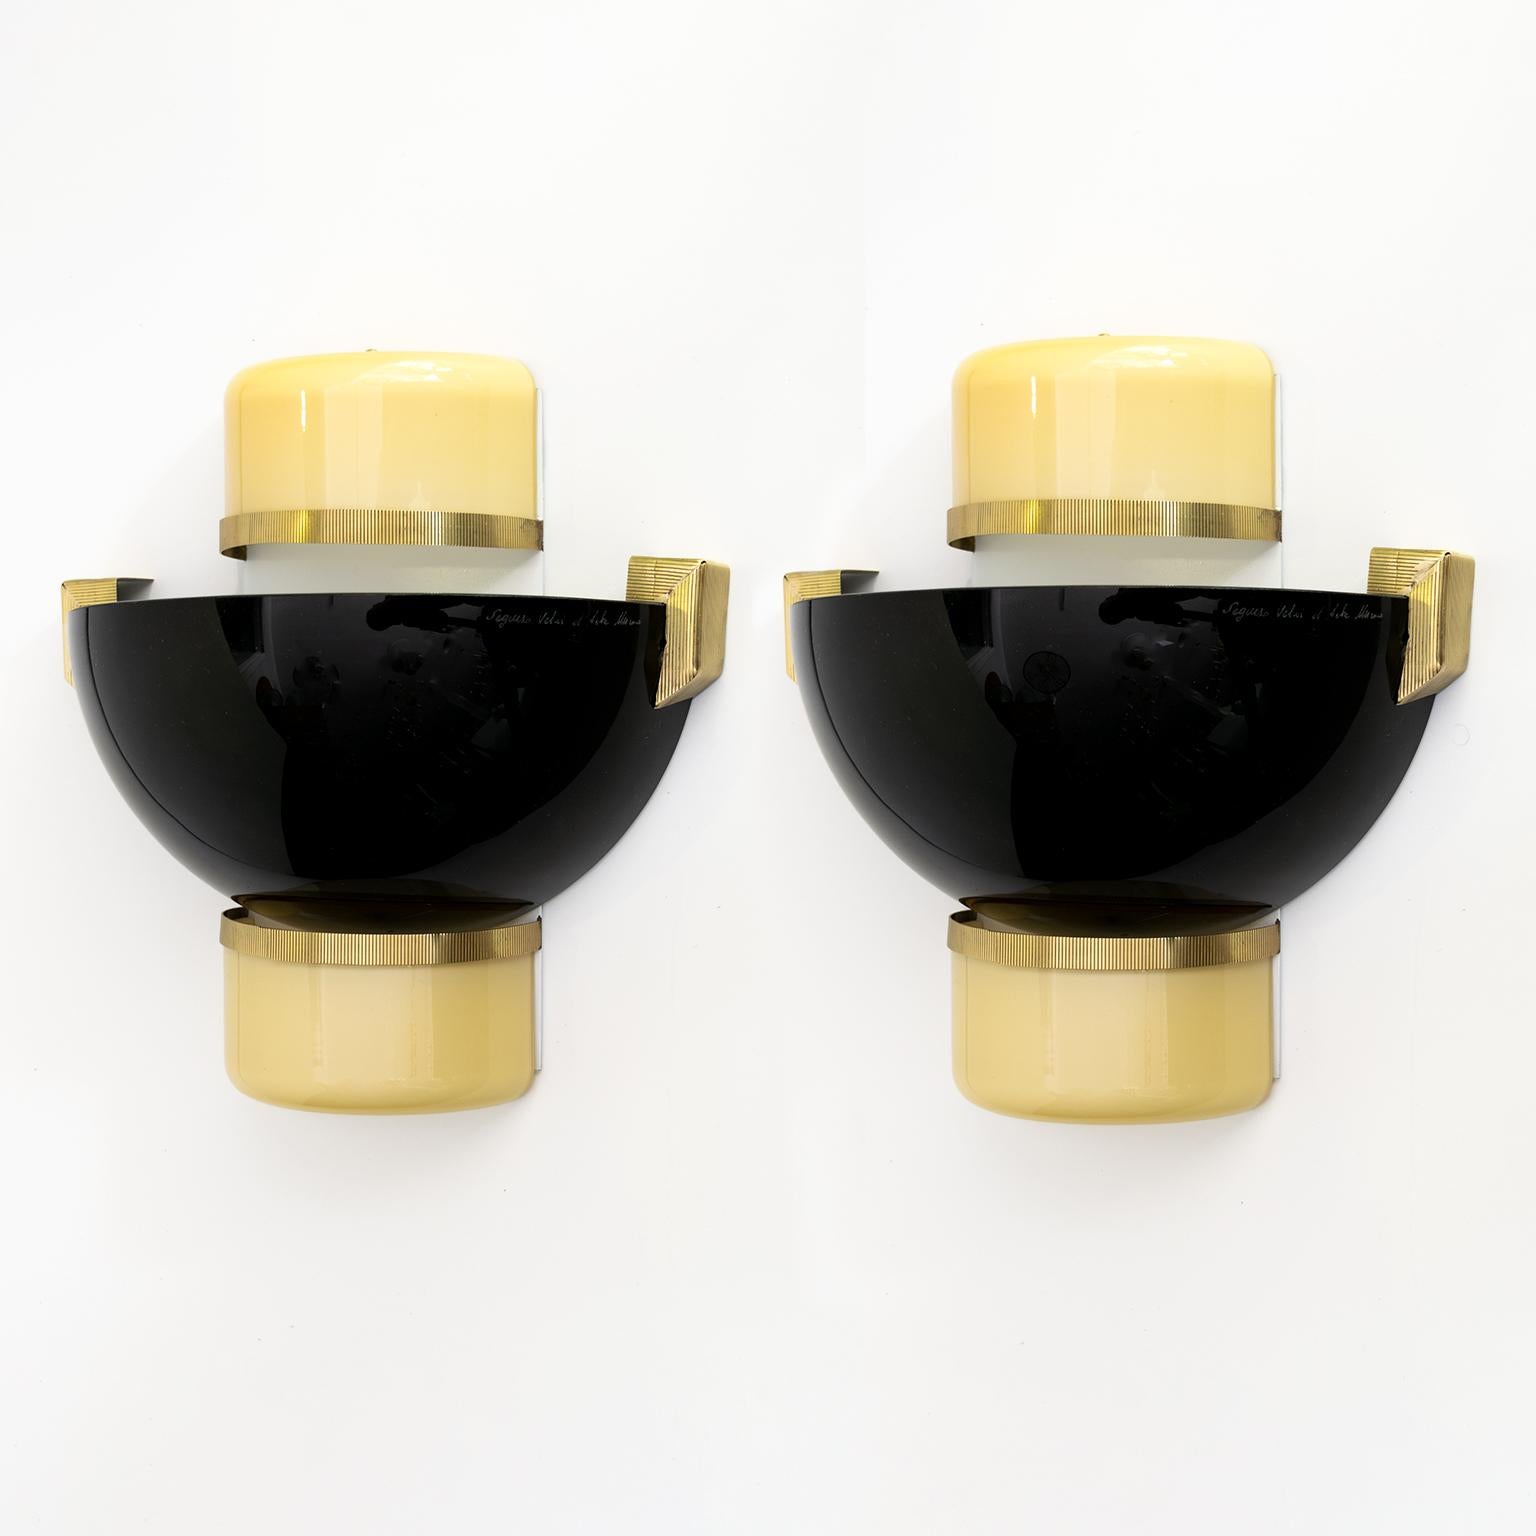 A pair of Mid-Century Modern Seguso Vetri d'Arte black and gold color glass sconces with detail in polished brass. The sconces have been fully restored and each sconce has been newly wired with 2 candelabra bulb sockets. Made in Murano, Italy circa